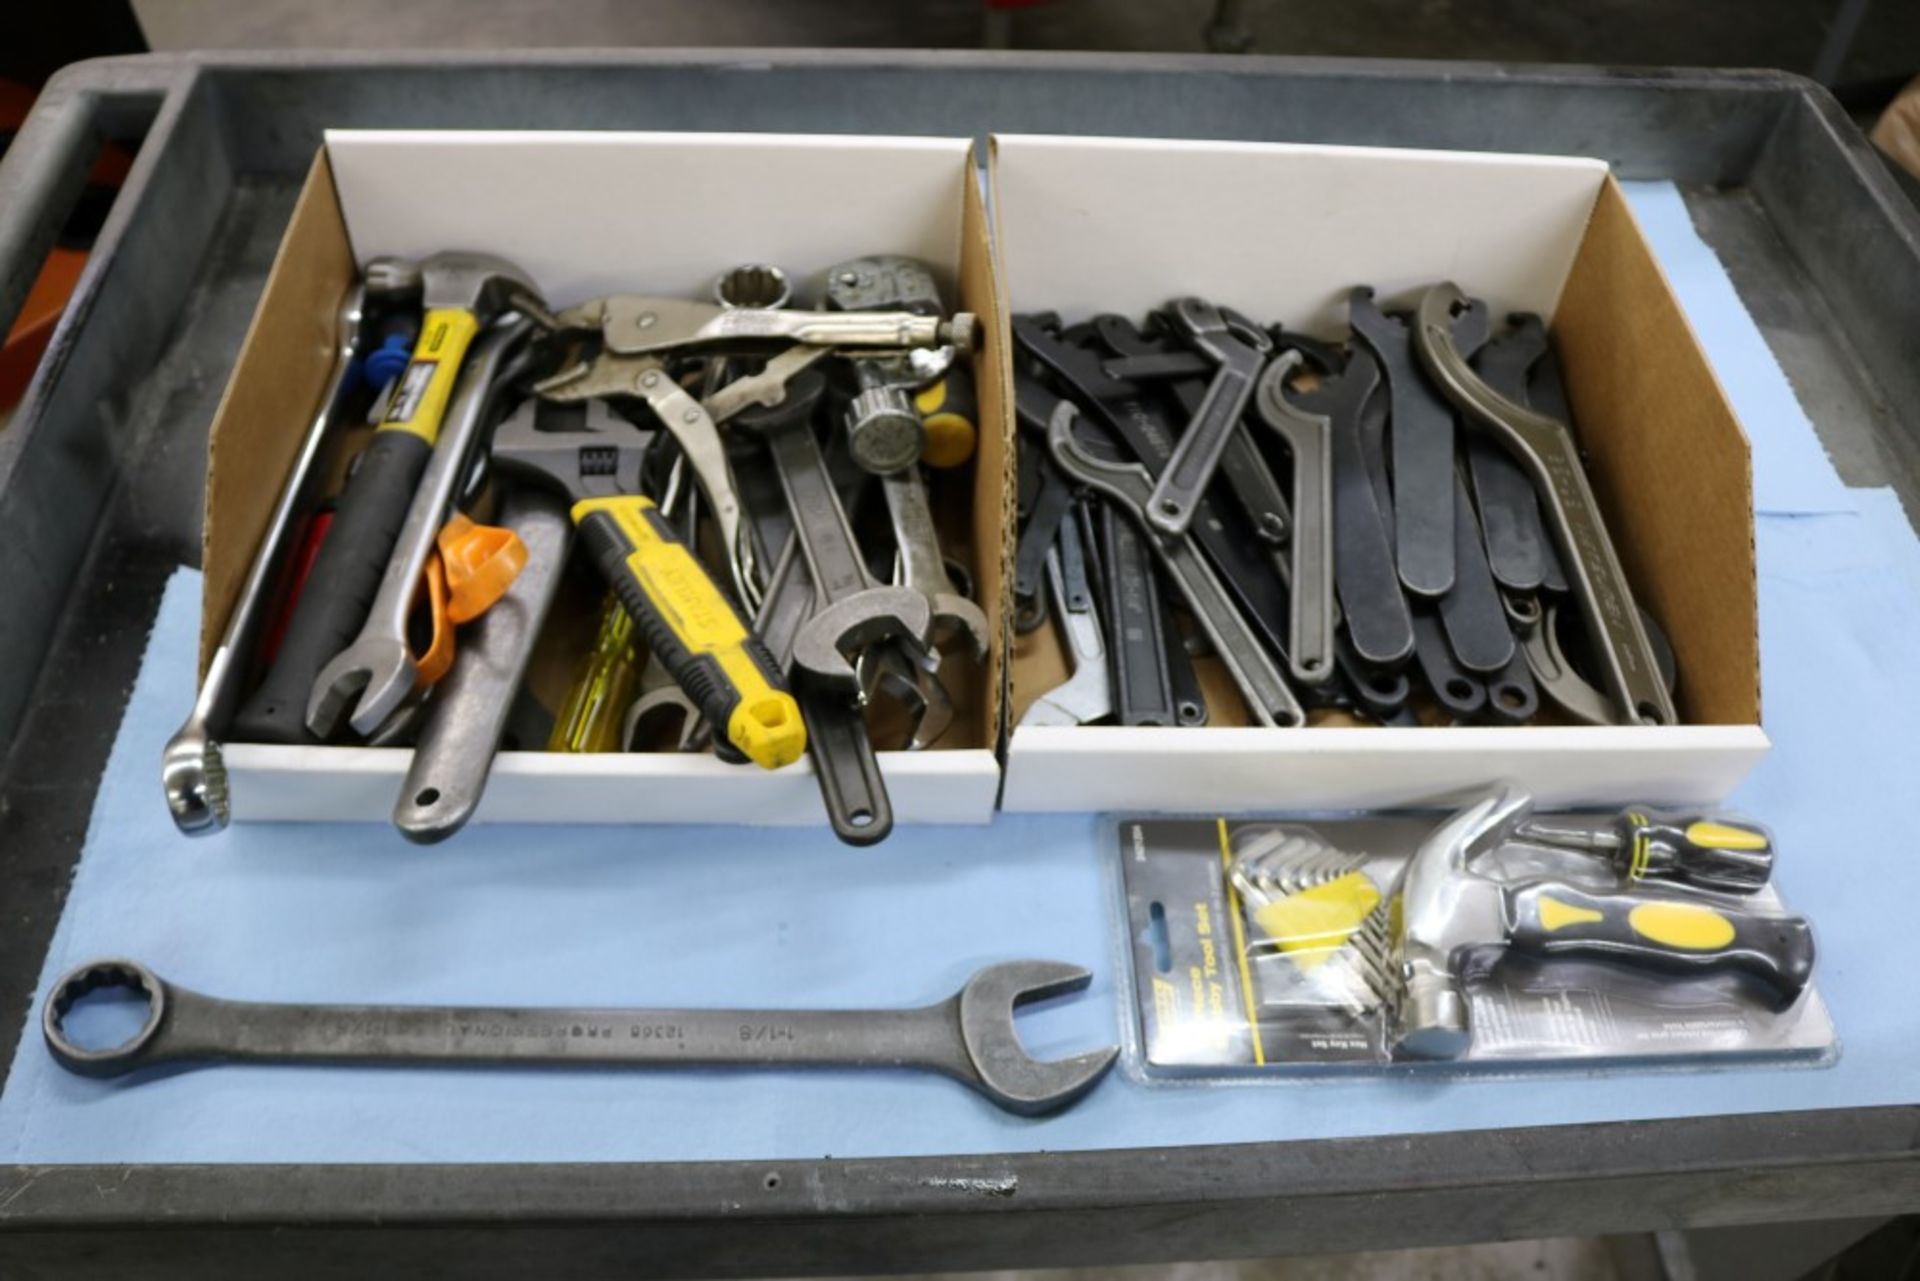 2 Boxes of Various Wrenches, Hammers, ER-32 Wrenches, CAT 40 Wrenches and Others